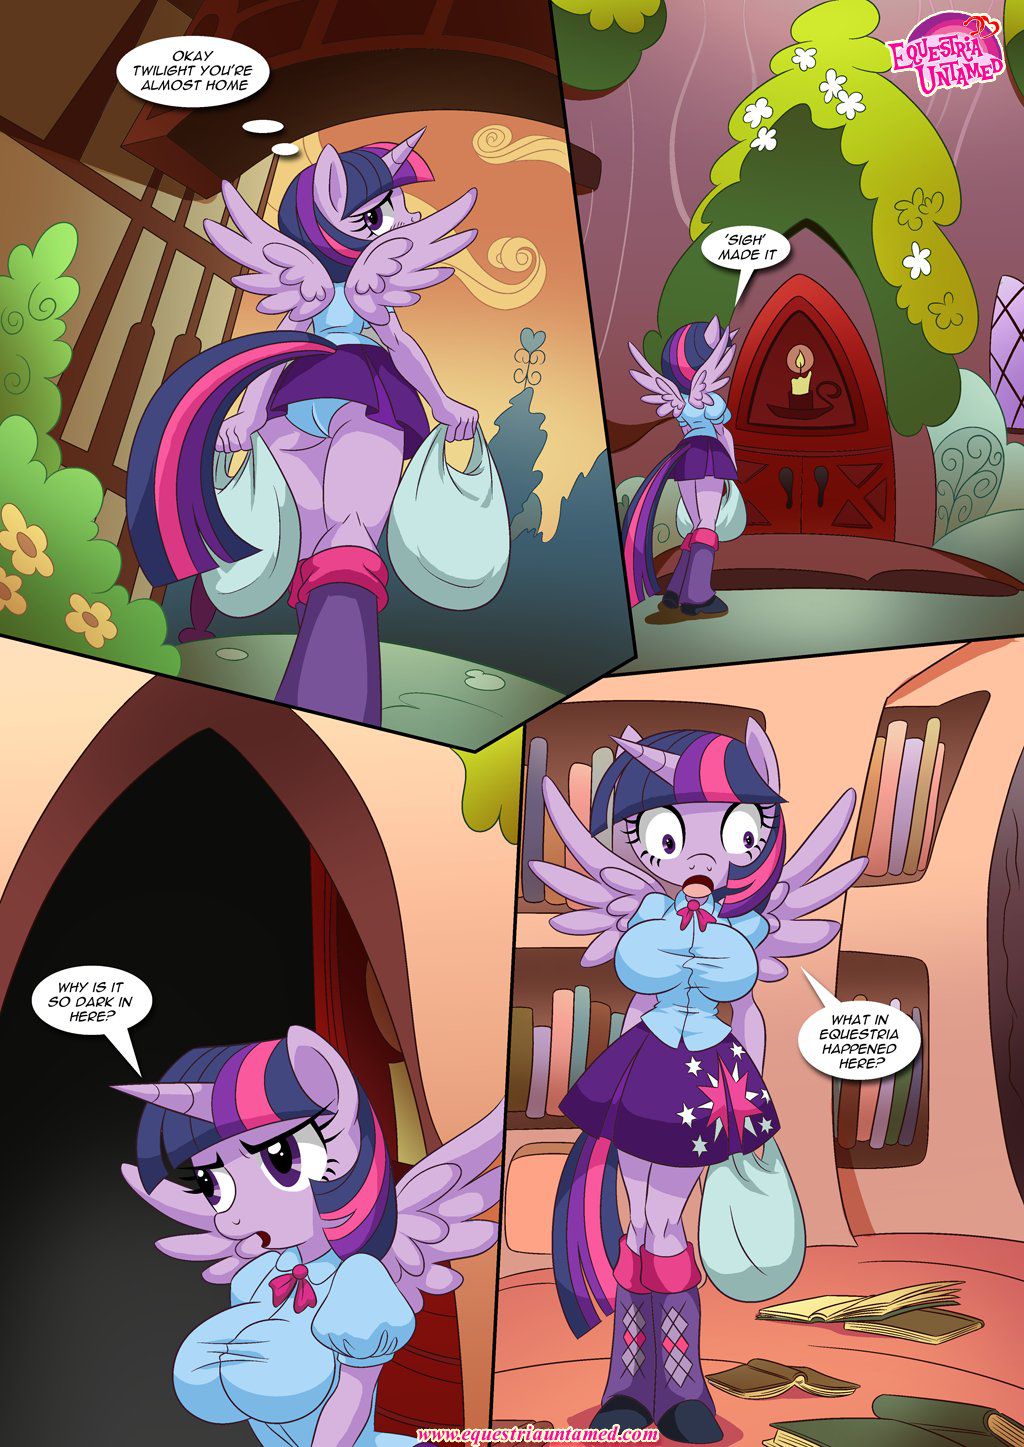 [Palcomix] Sex Ed with Miss Twilight Sparkle (My Little Pony Friendship Is Magic) [Ongoing] 3